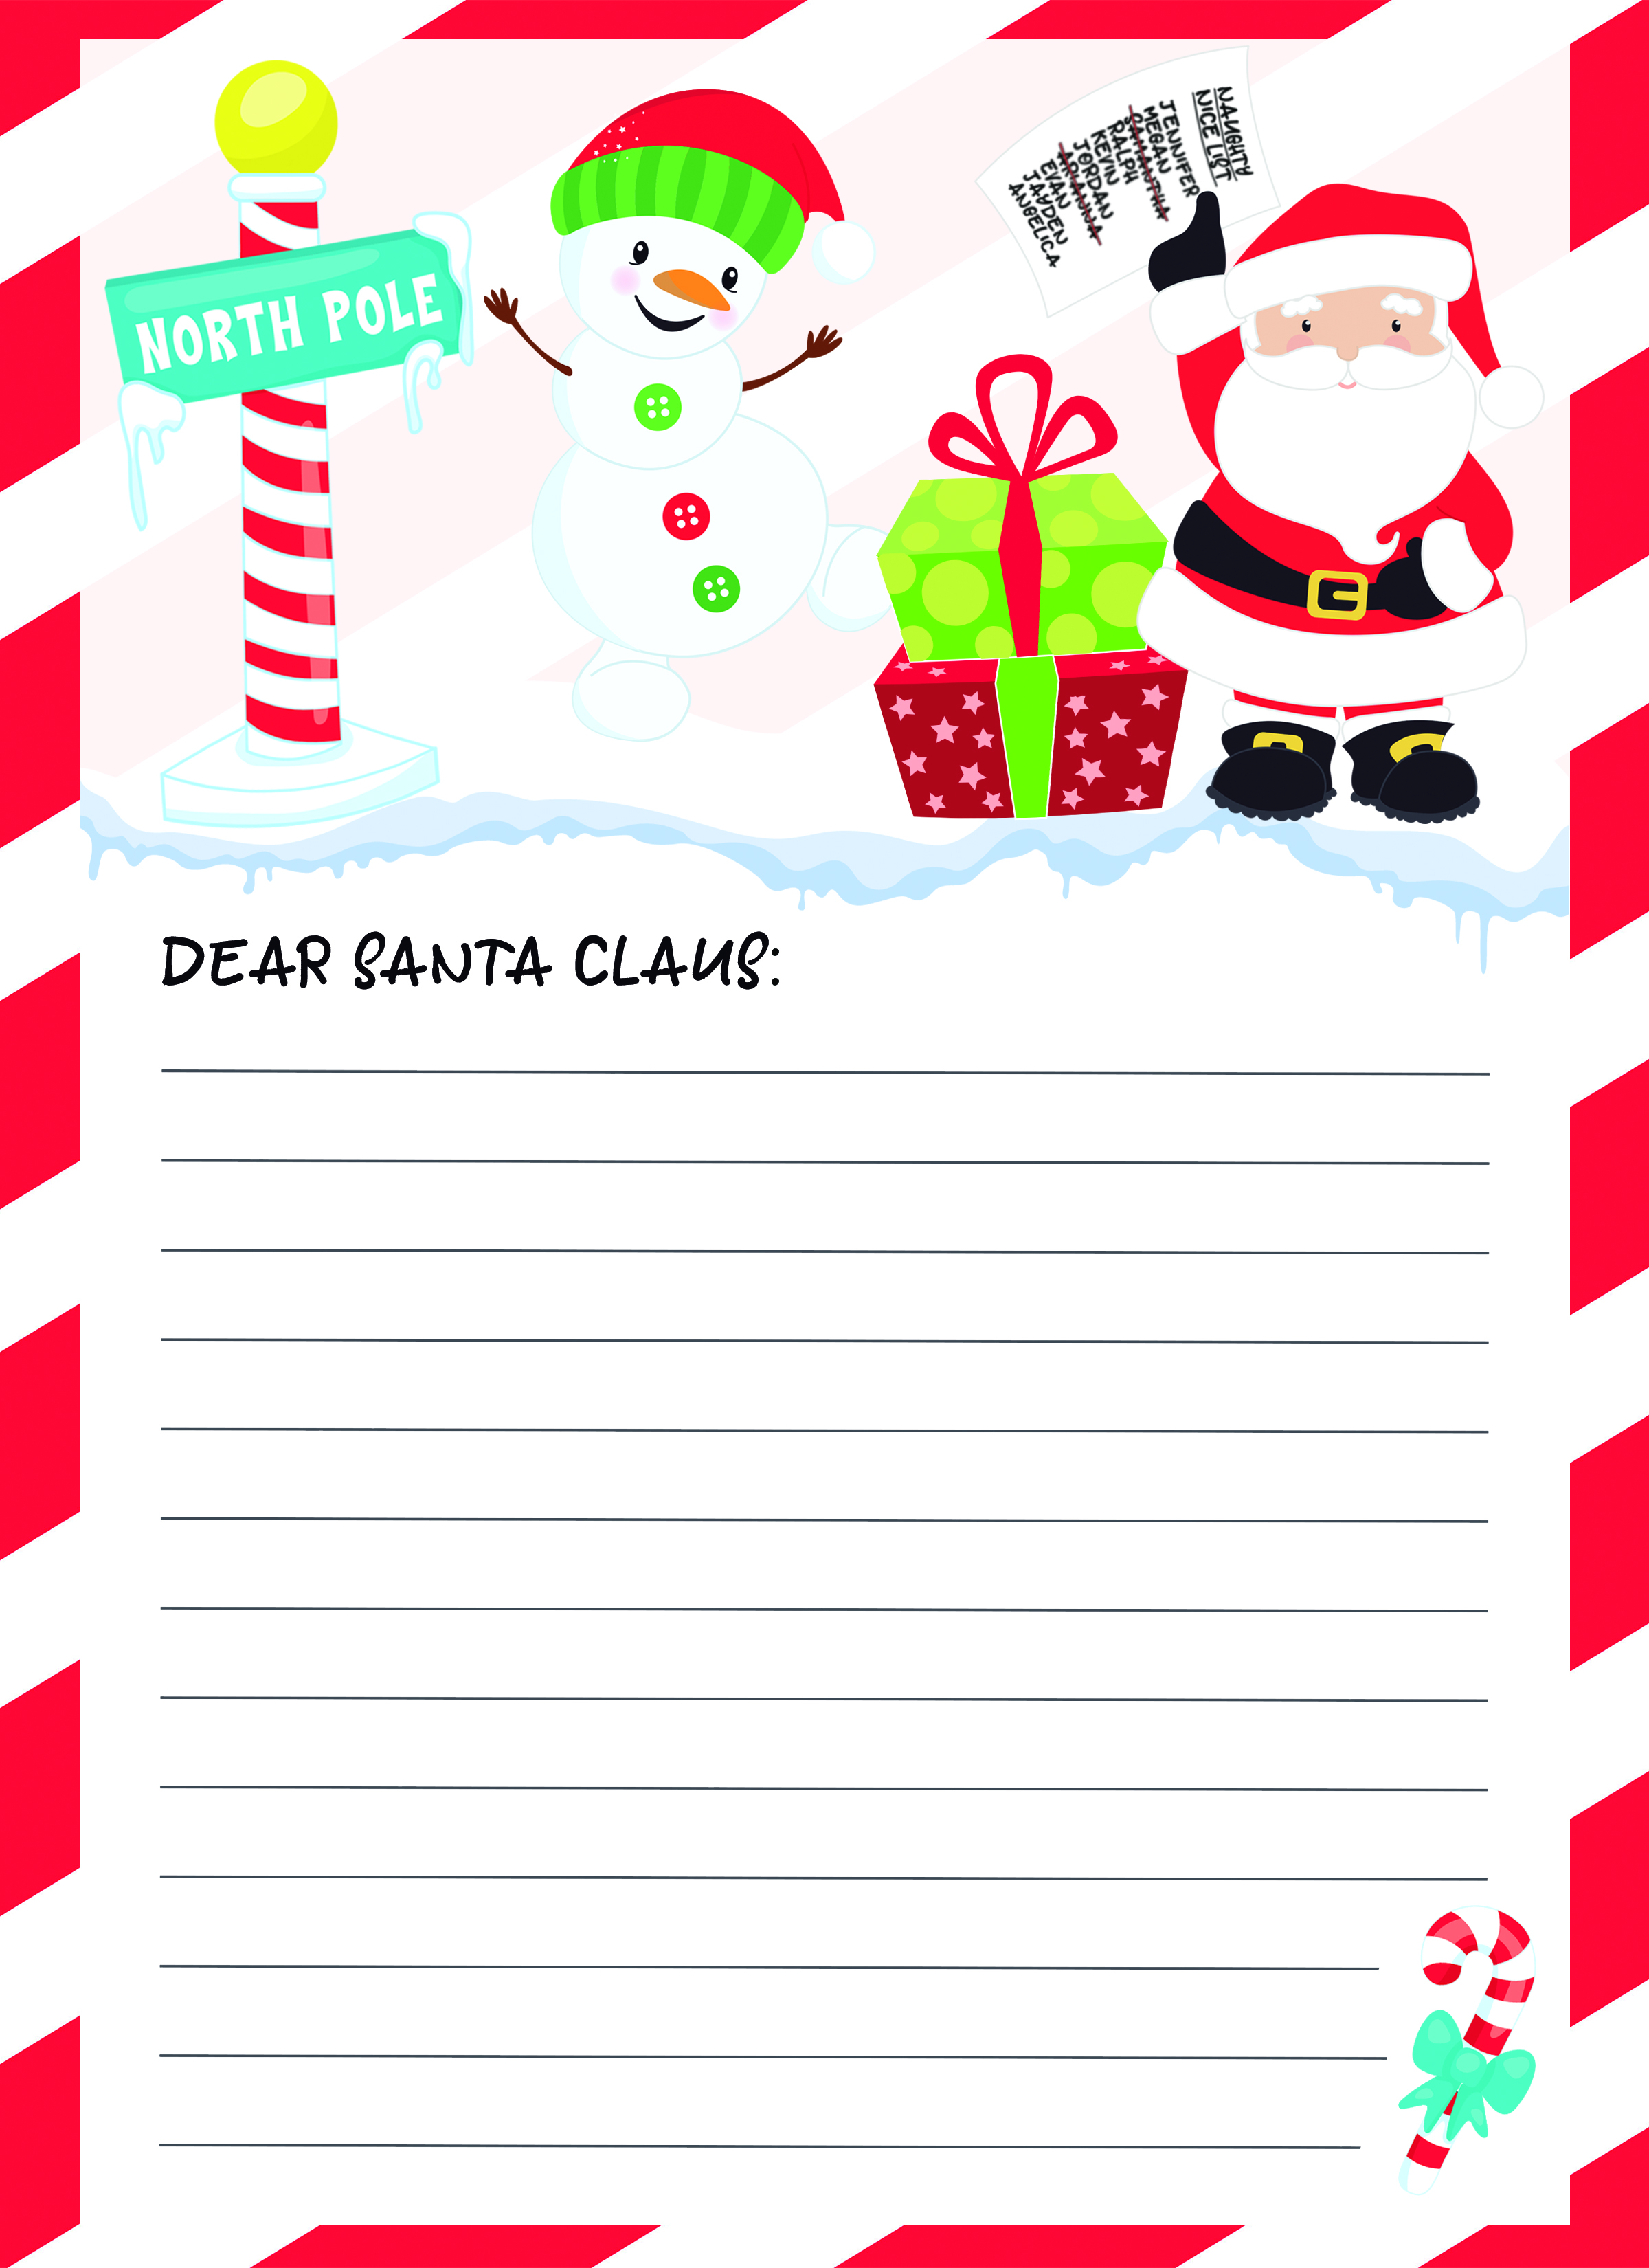 have-you-done-santa-letters-yet-print-one-of-these-5-cool-letters-now